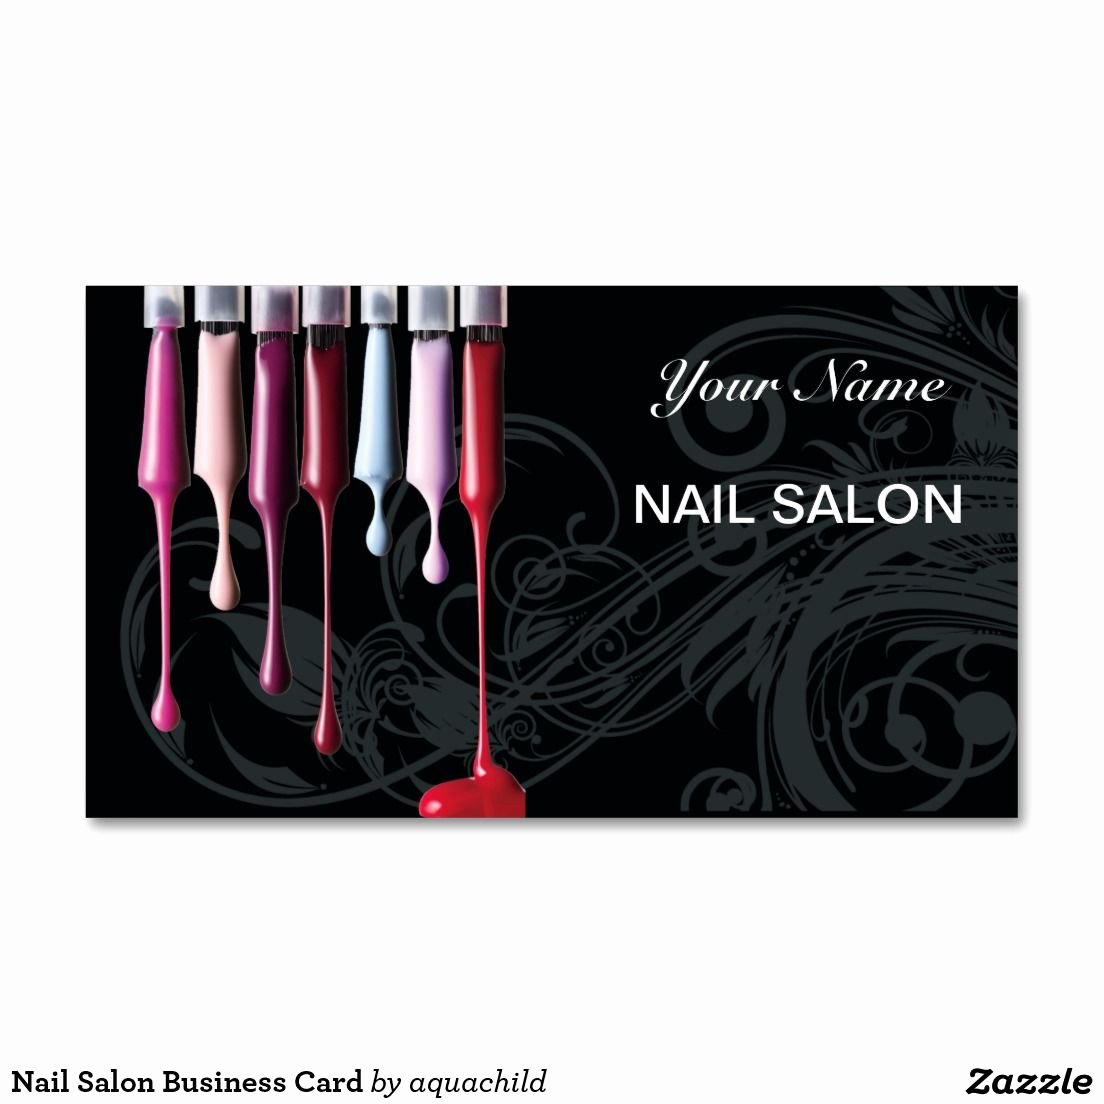 Nails Business Cards Design New Nail Salon Business Card Zazzle Customized Nail Salon Business Cards